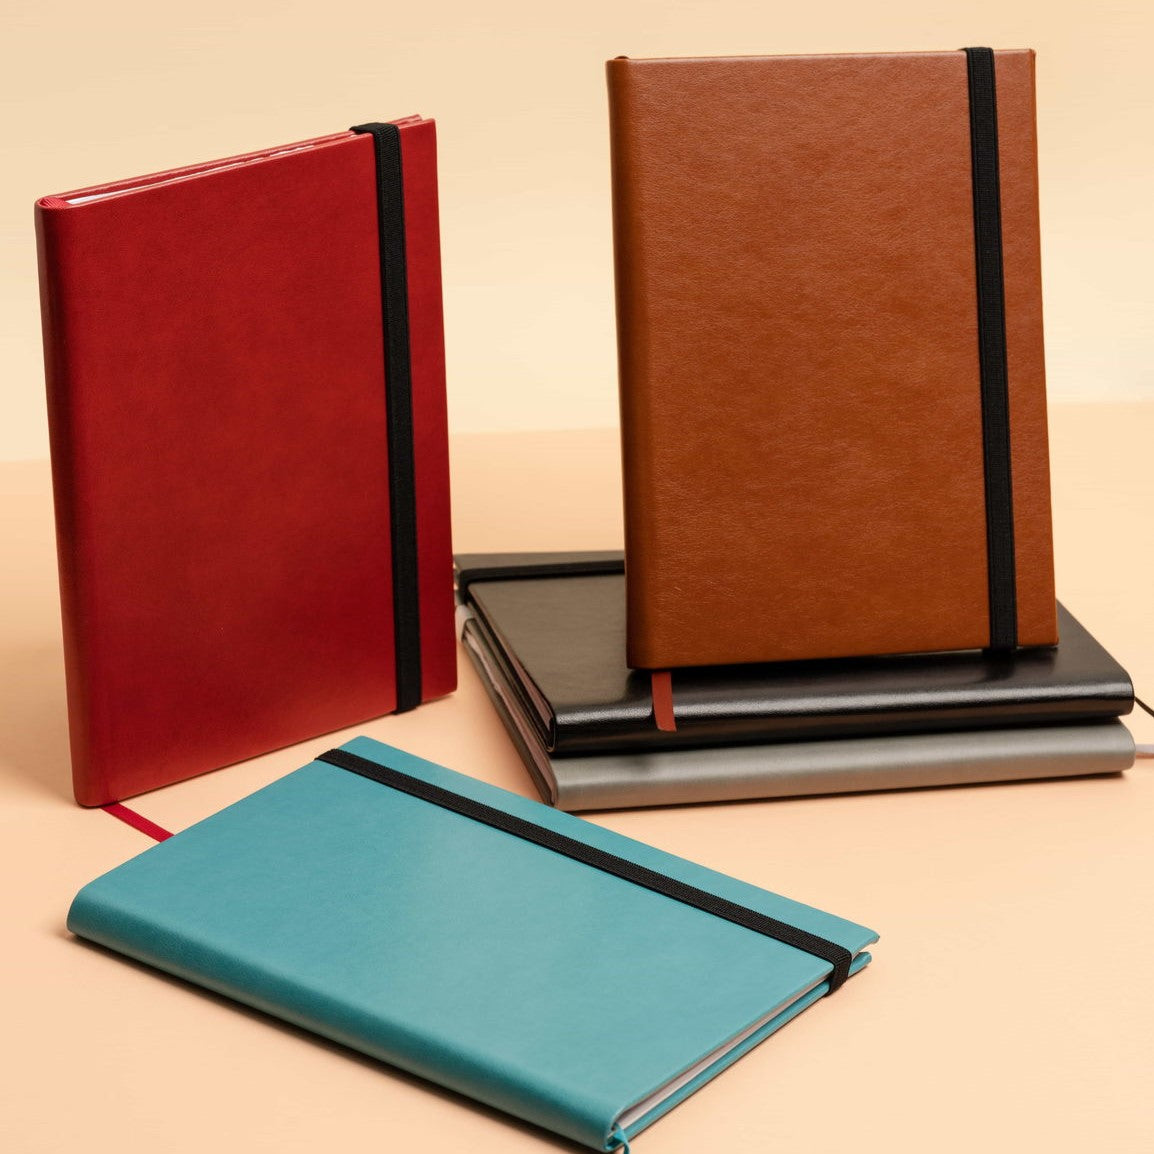 The Paper Saver Reusable Notebook range are available in different colours to suit your style, sustainably.